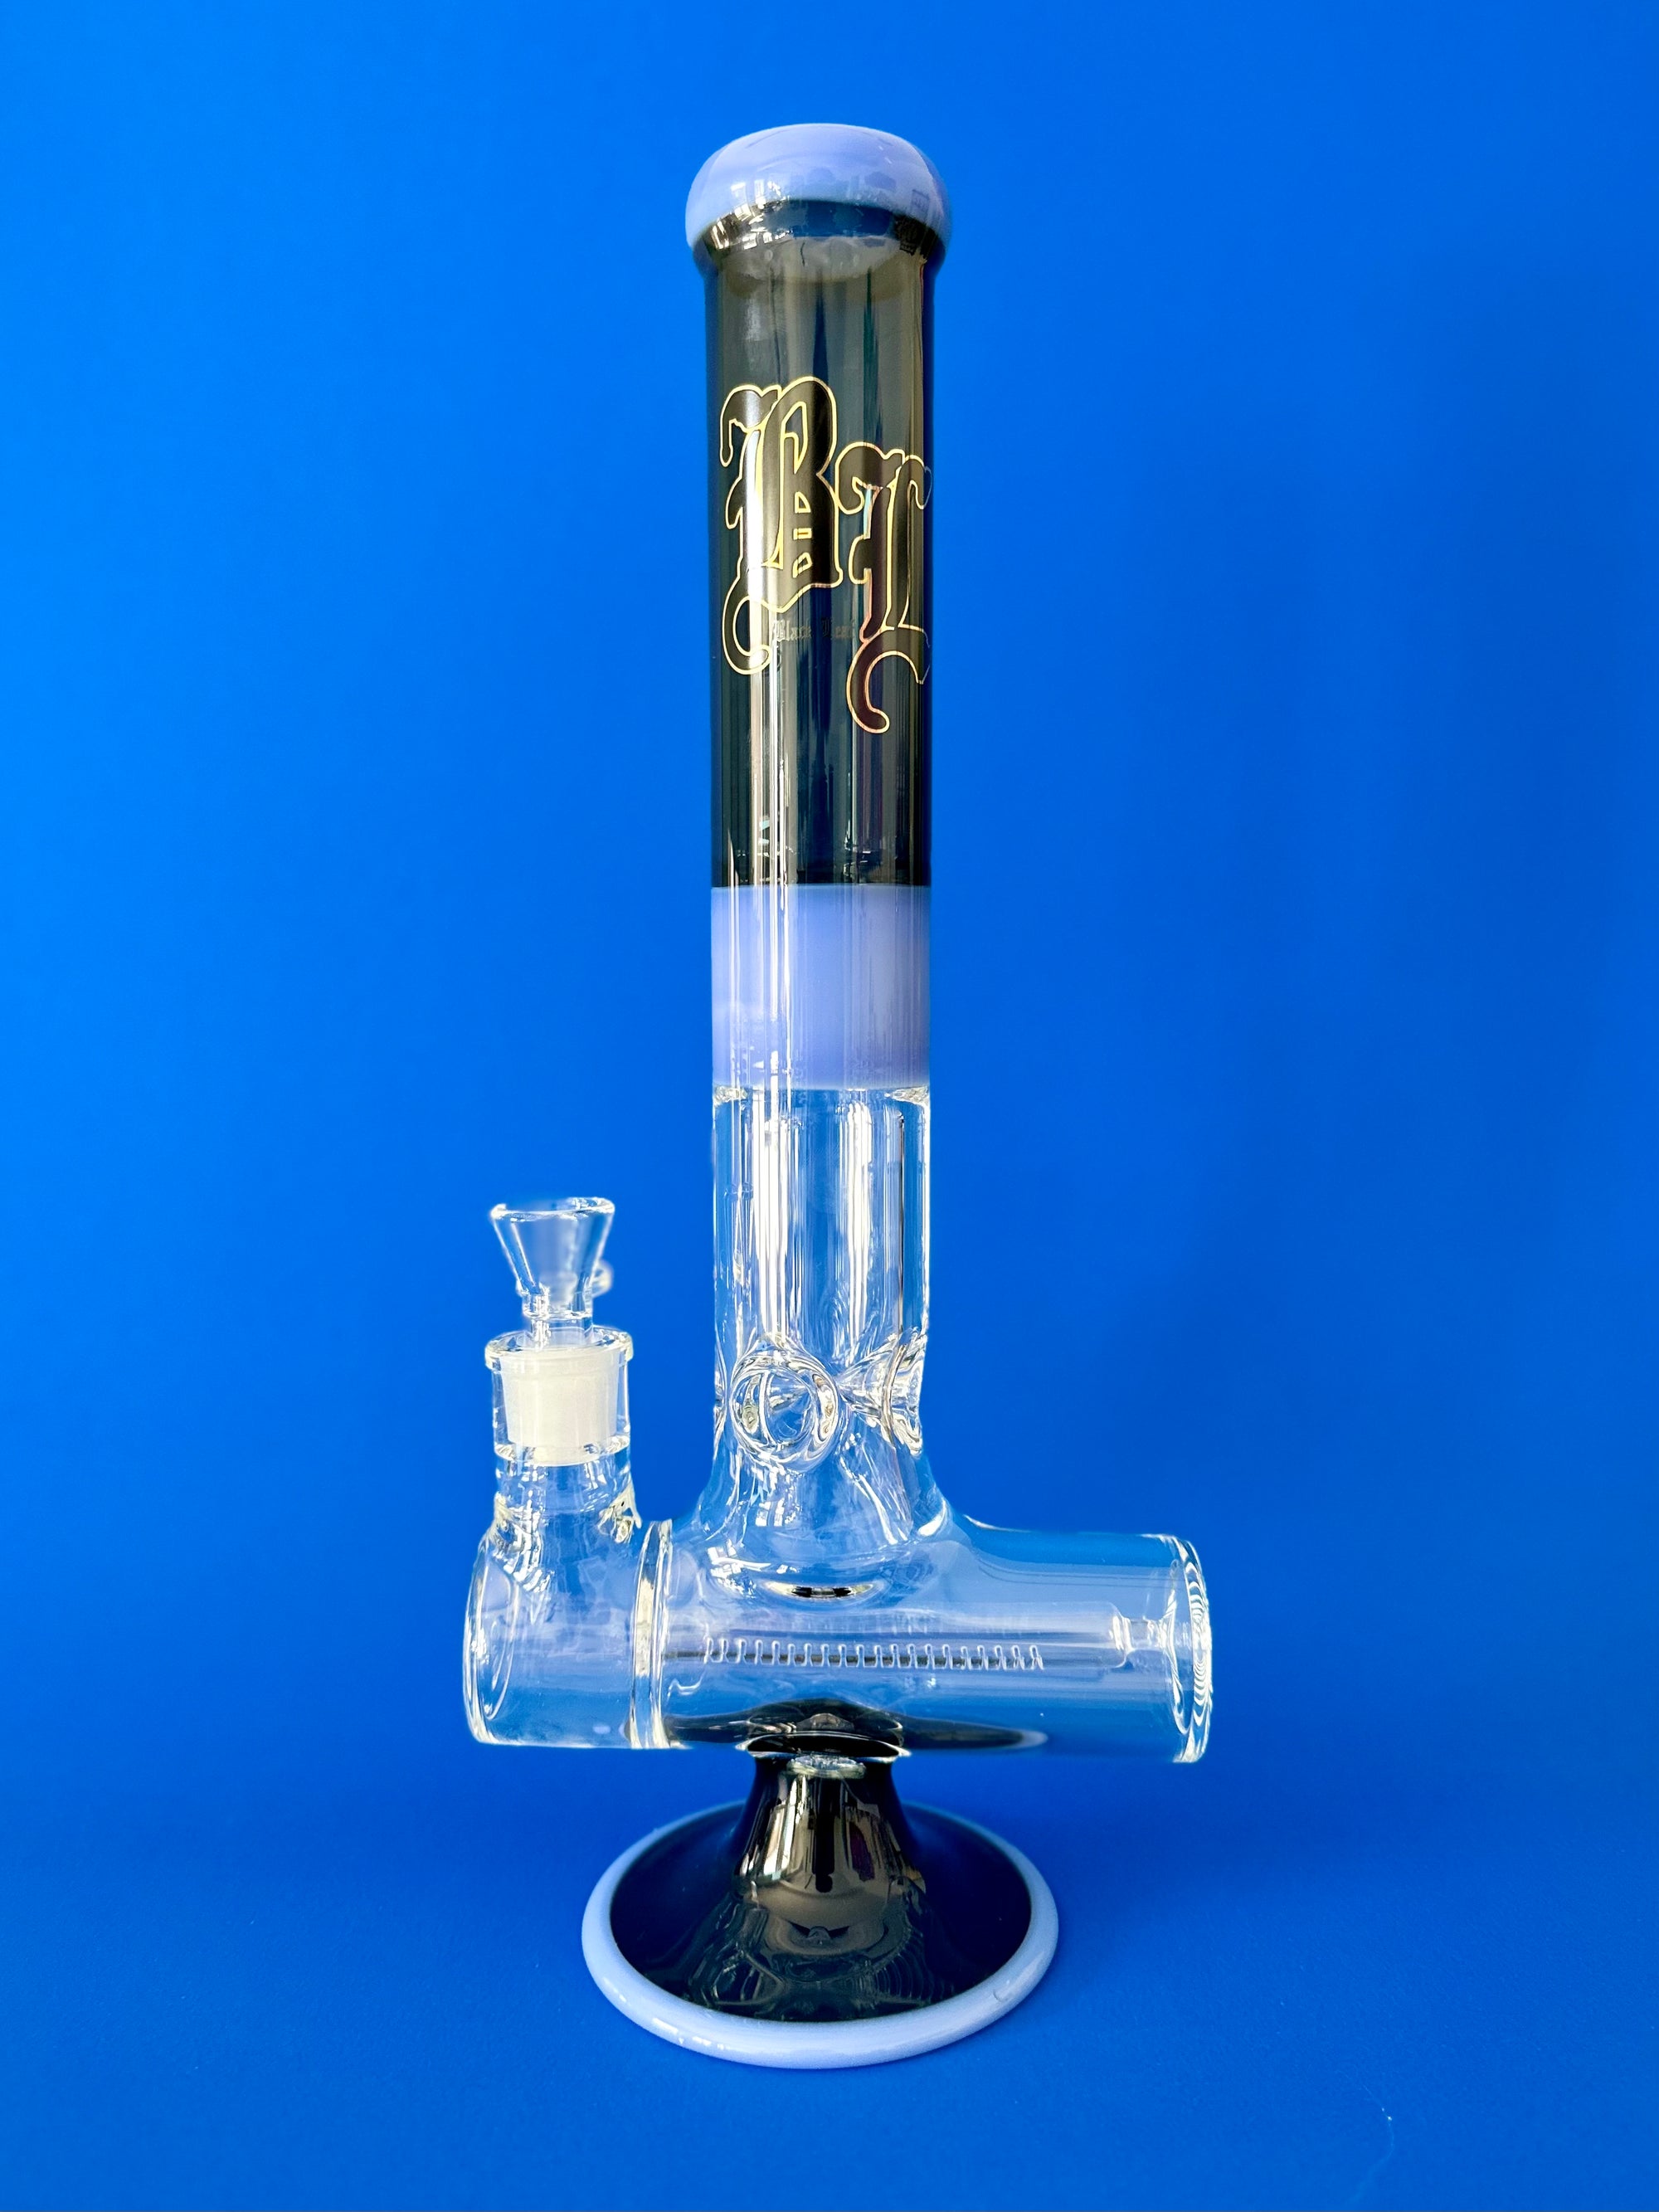 Nautilus Ice Bong with Percolator by Black Leaf (Blue/Black)